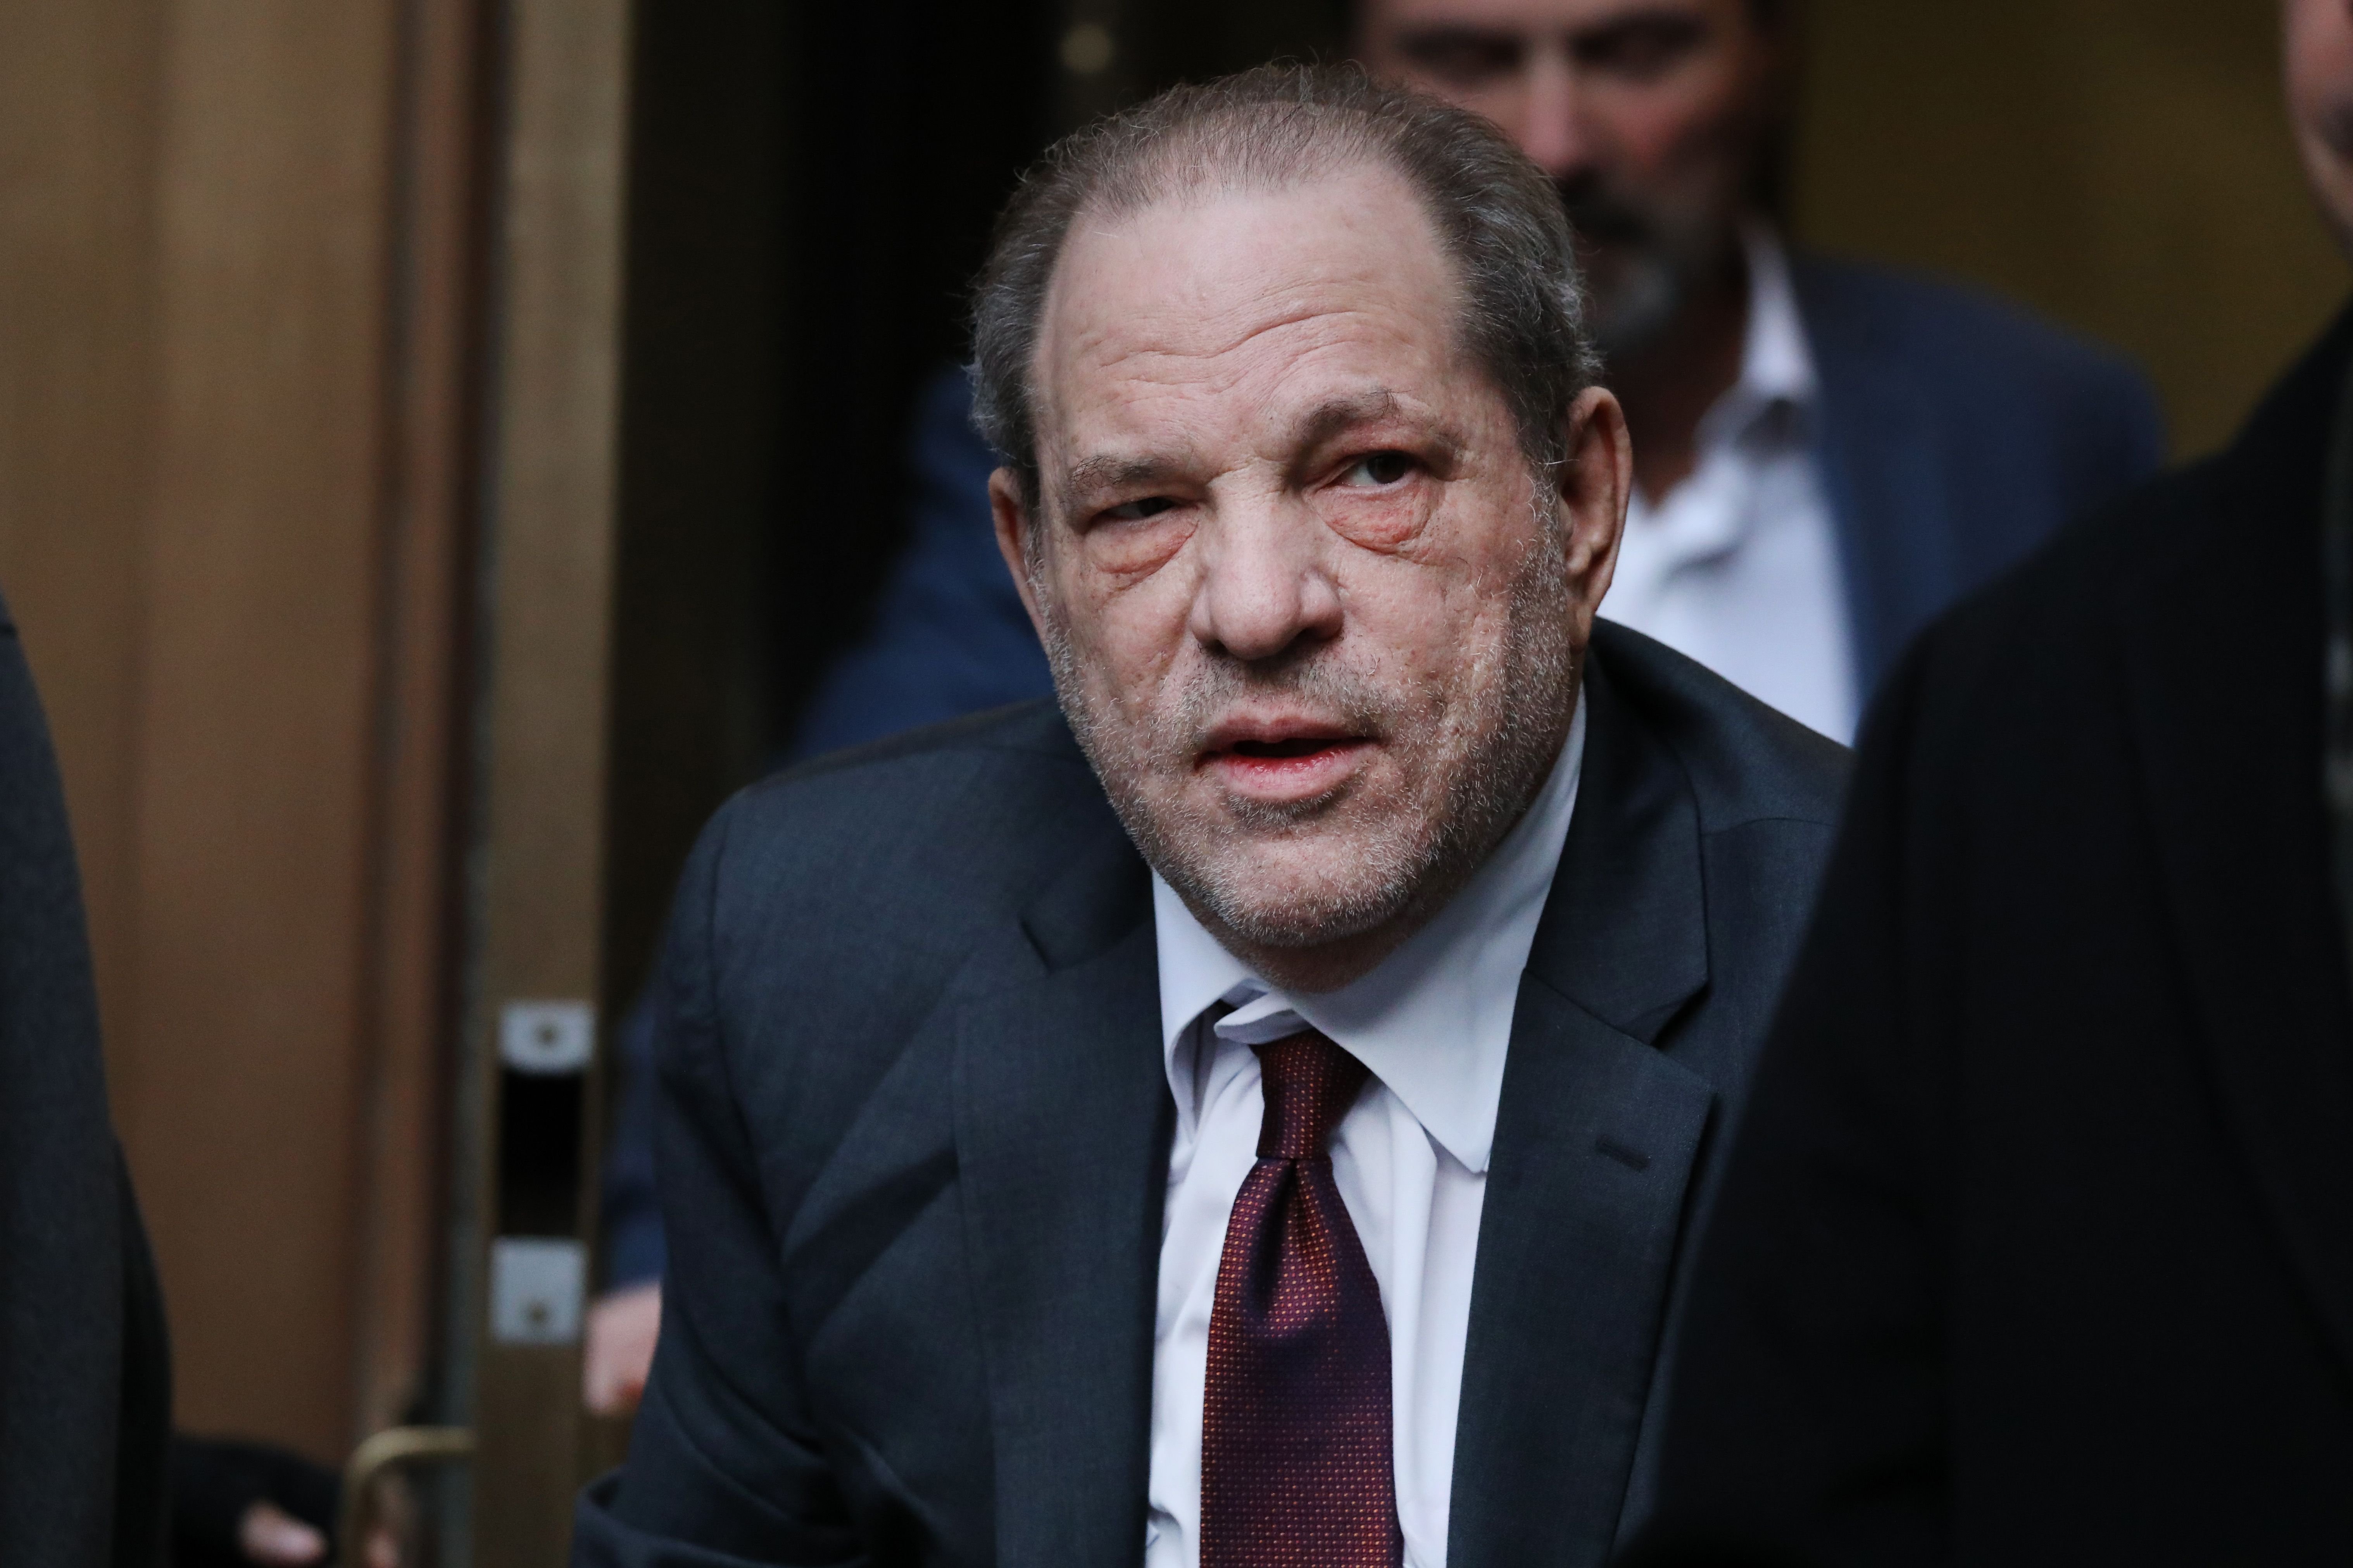 Harvey Weinstein at a court house as a jury continues with deliberations in his trial on February 20, 2020 in New York City. | Source: Getty Images